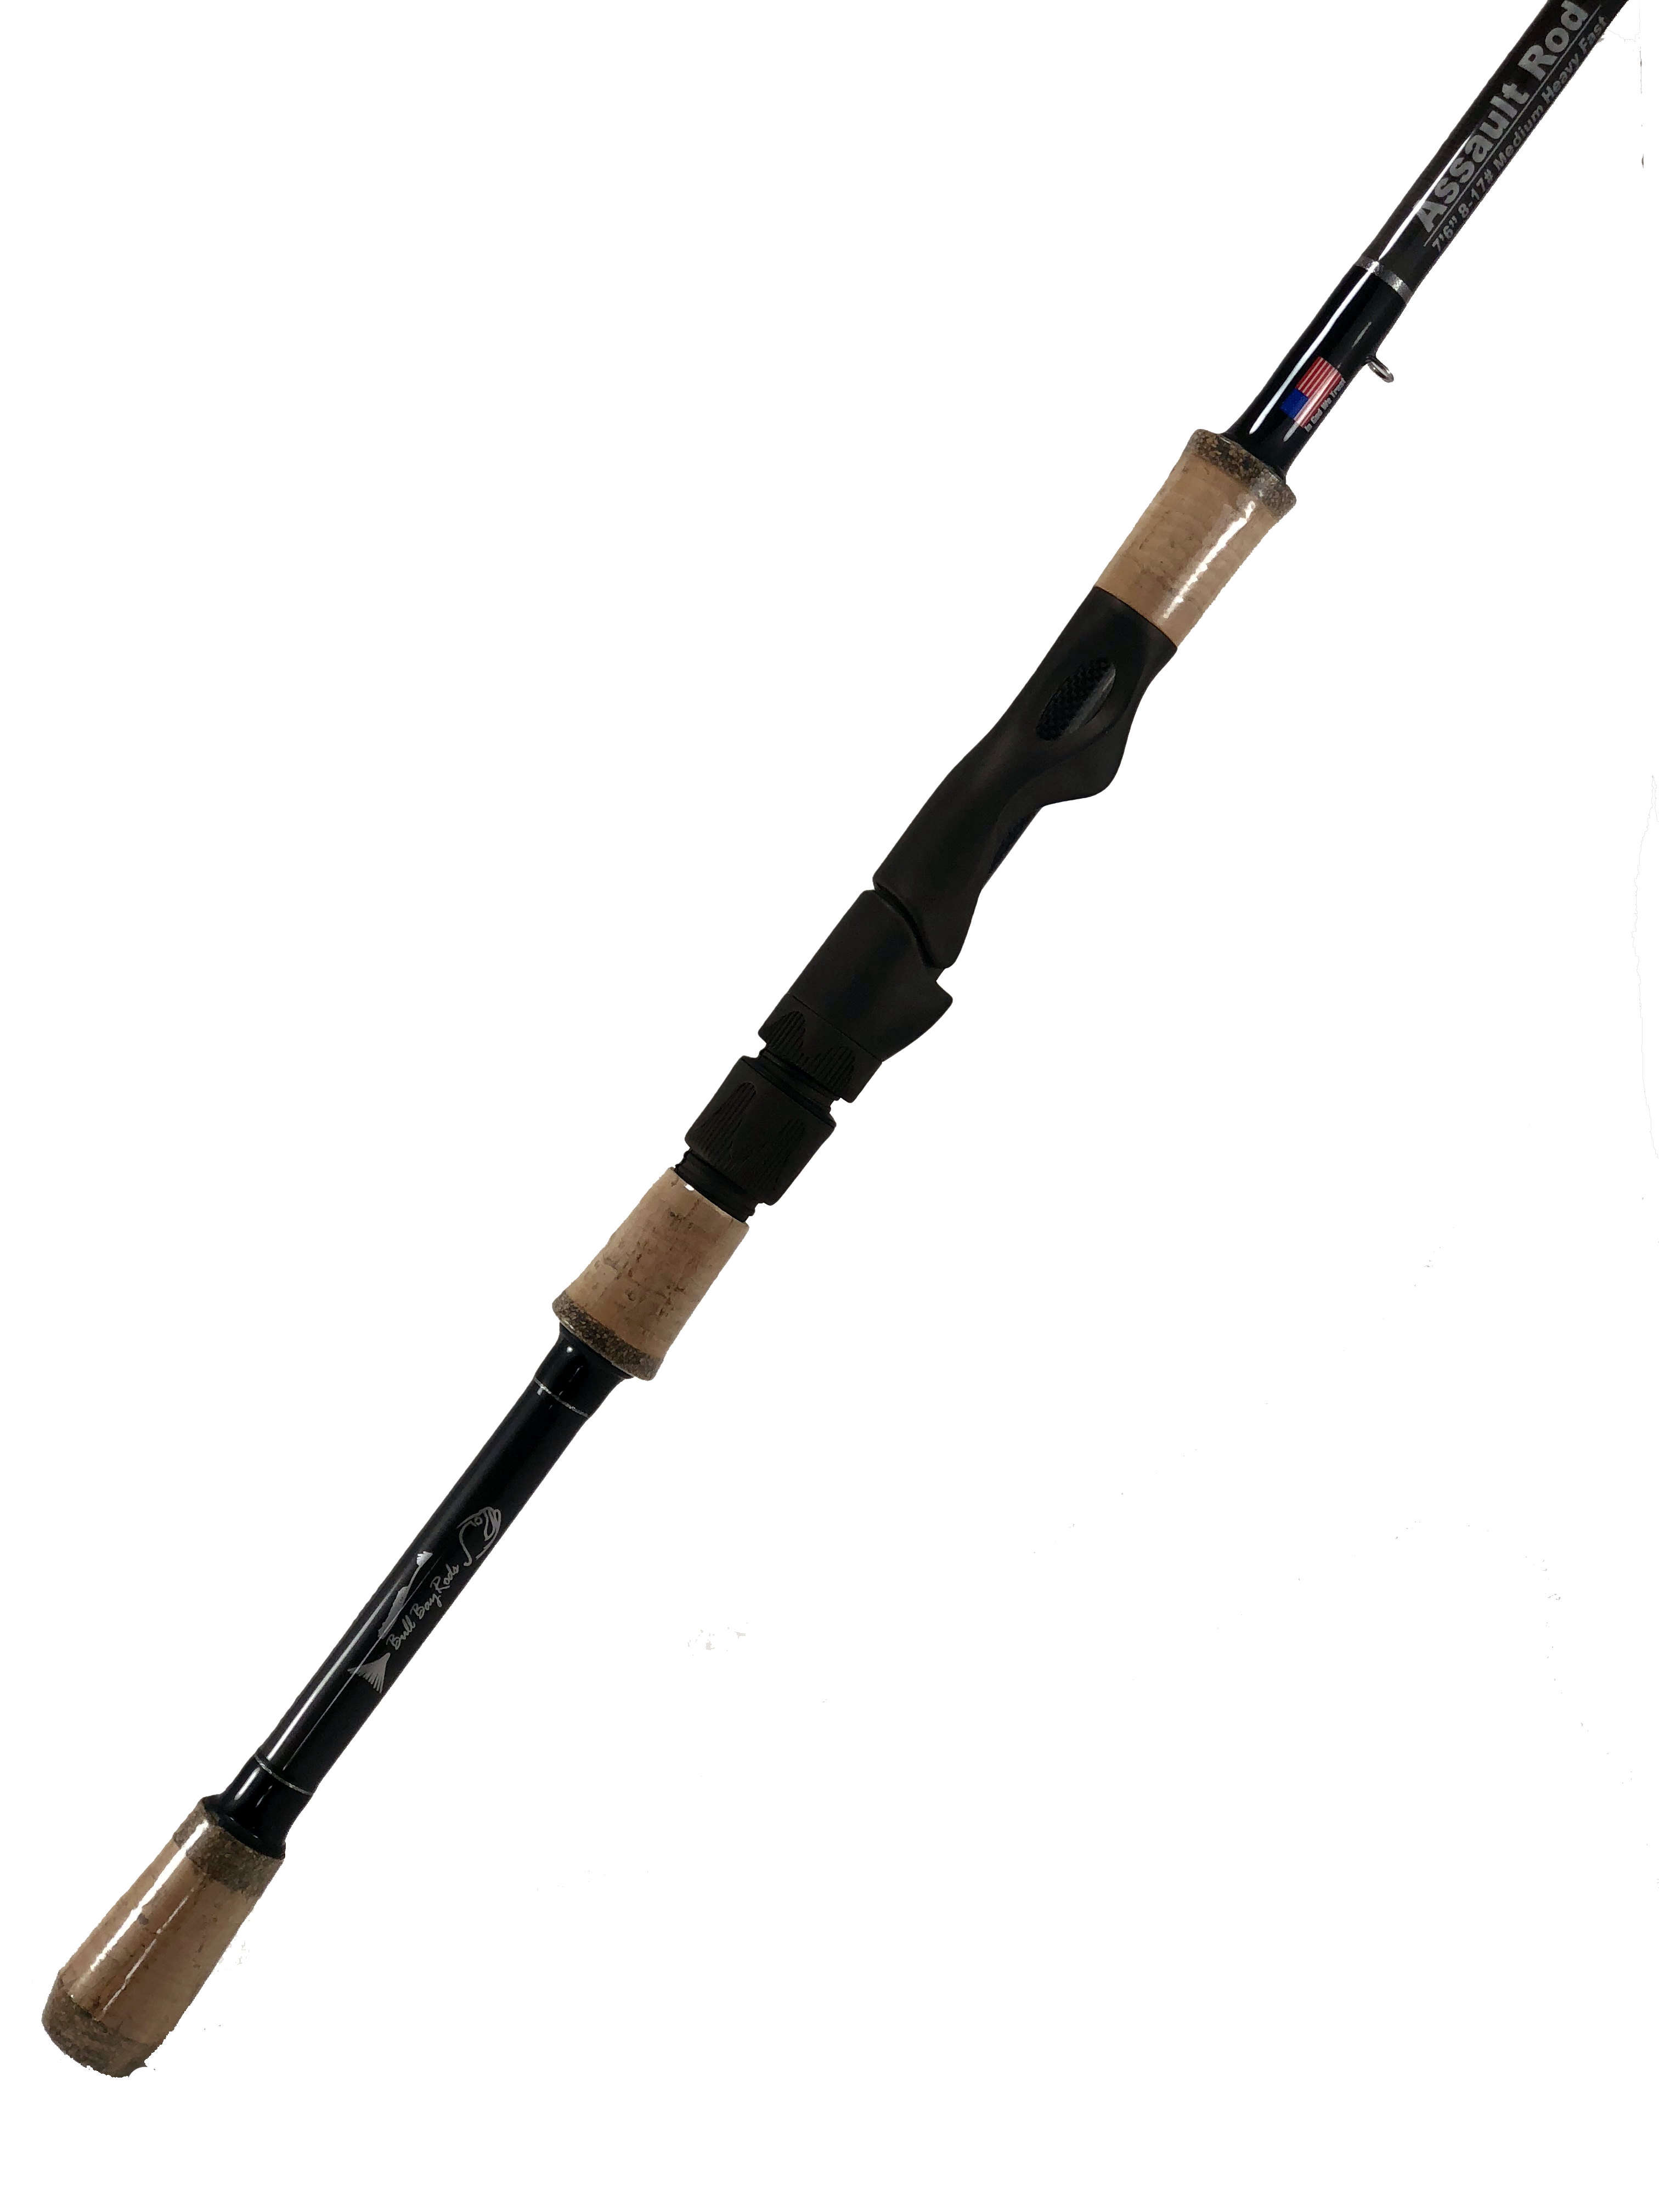 Bull Bay Rods - Andy Thornal Company